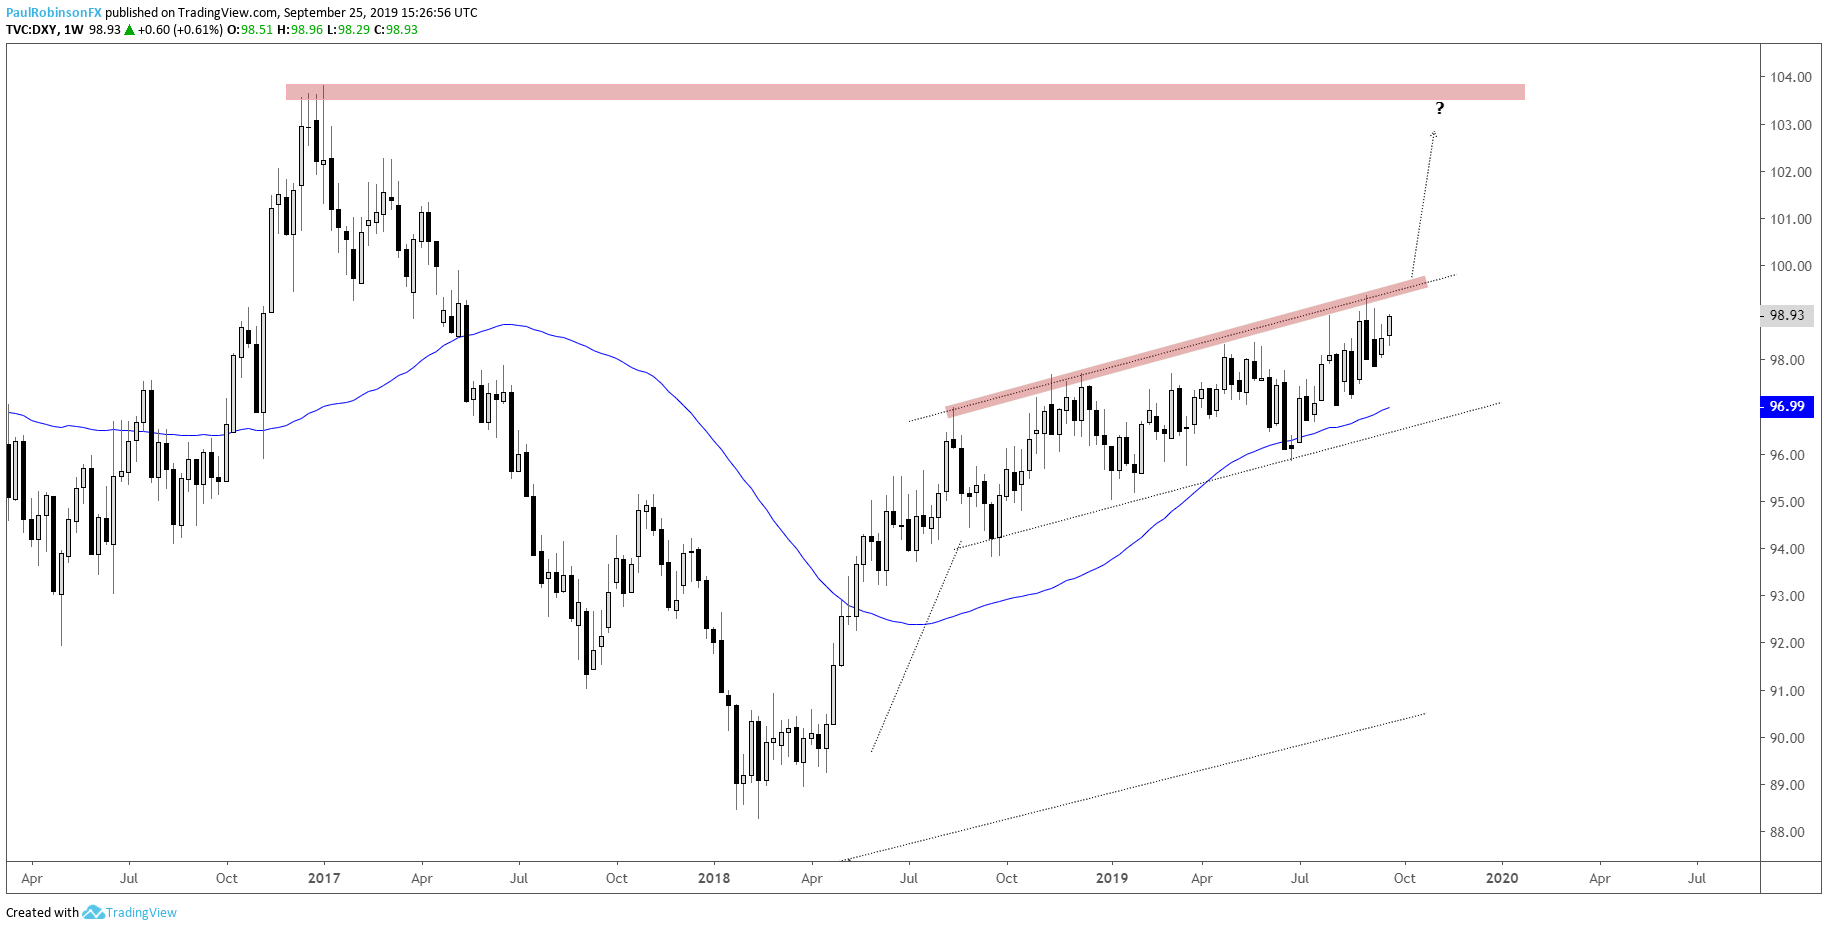 US Dollar Index (DXY) weekly chart